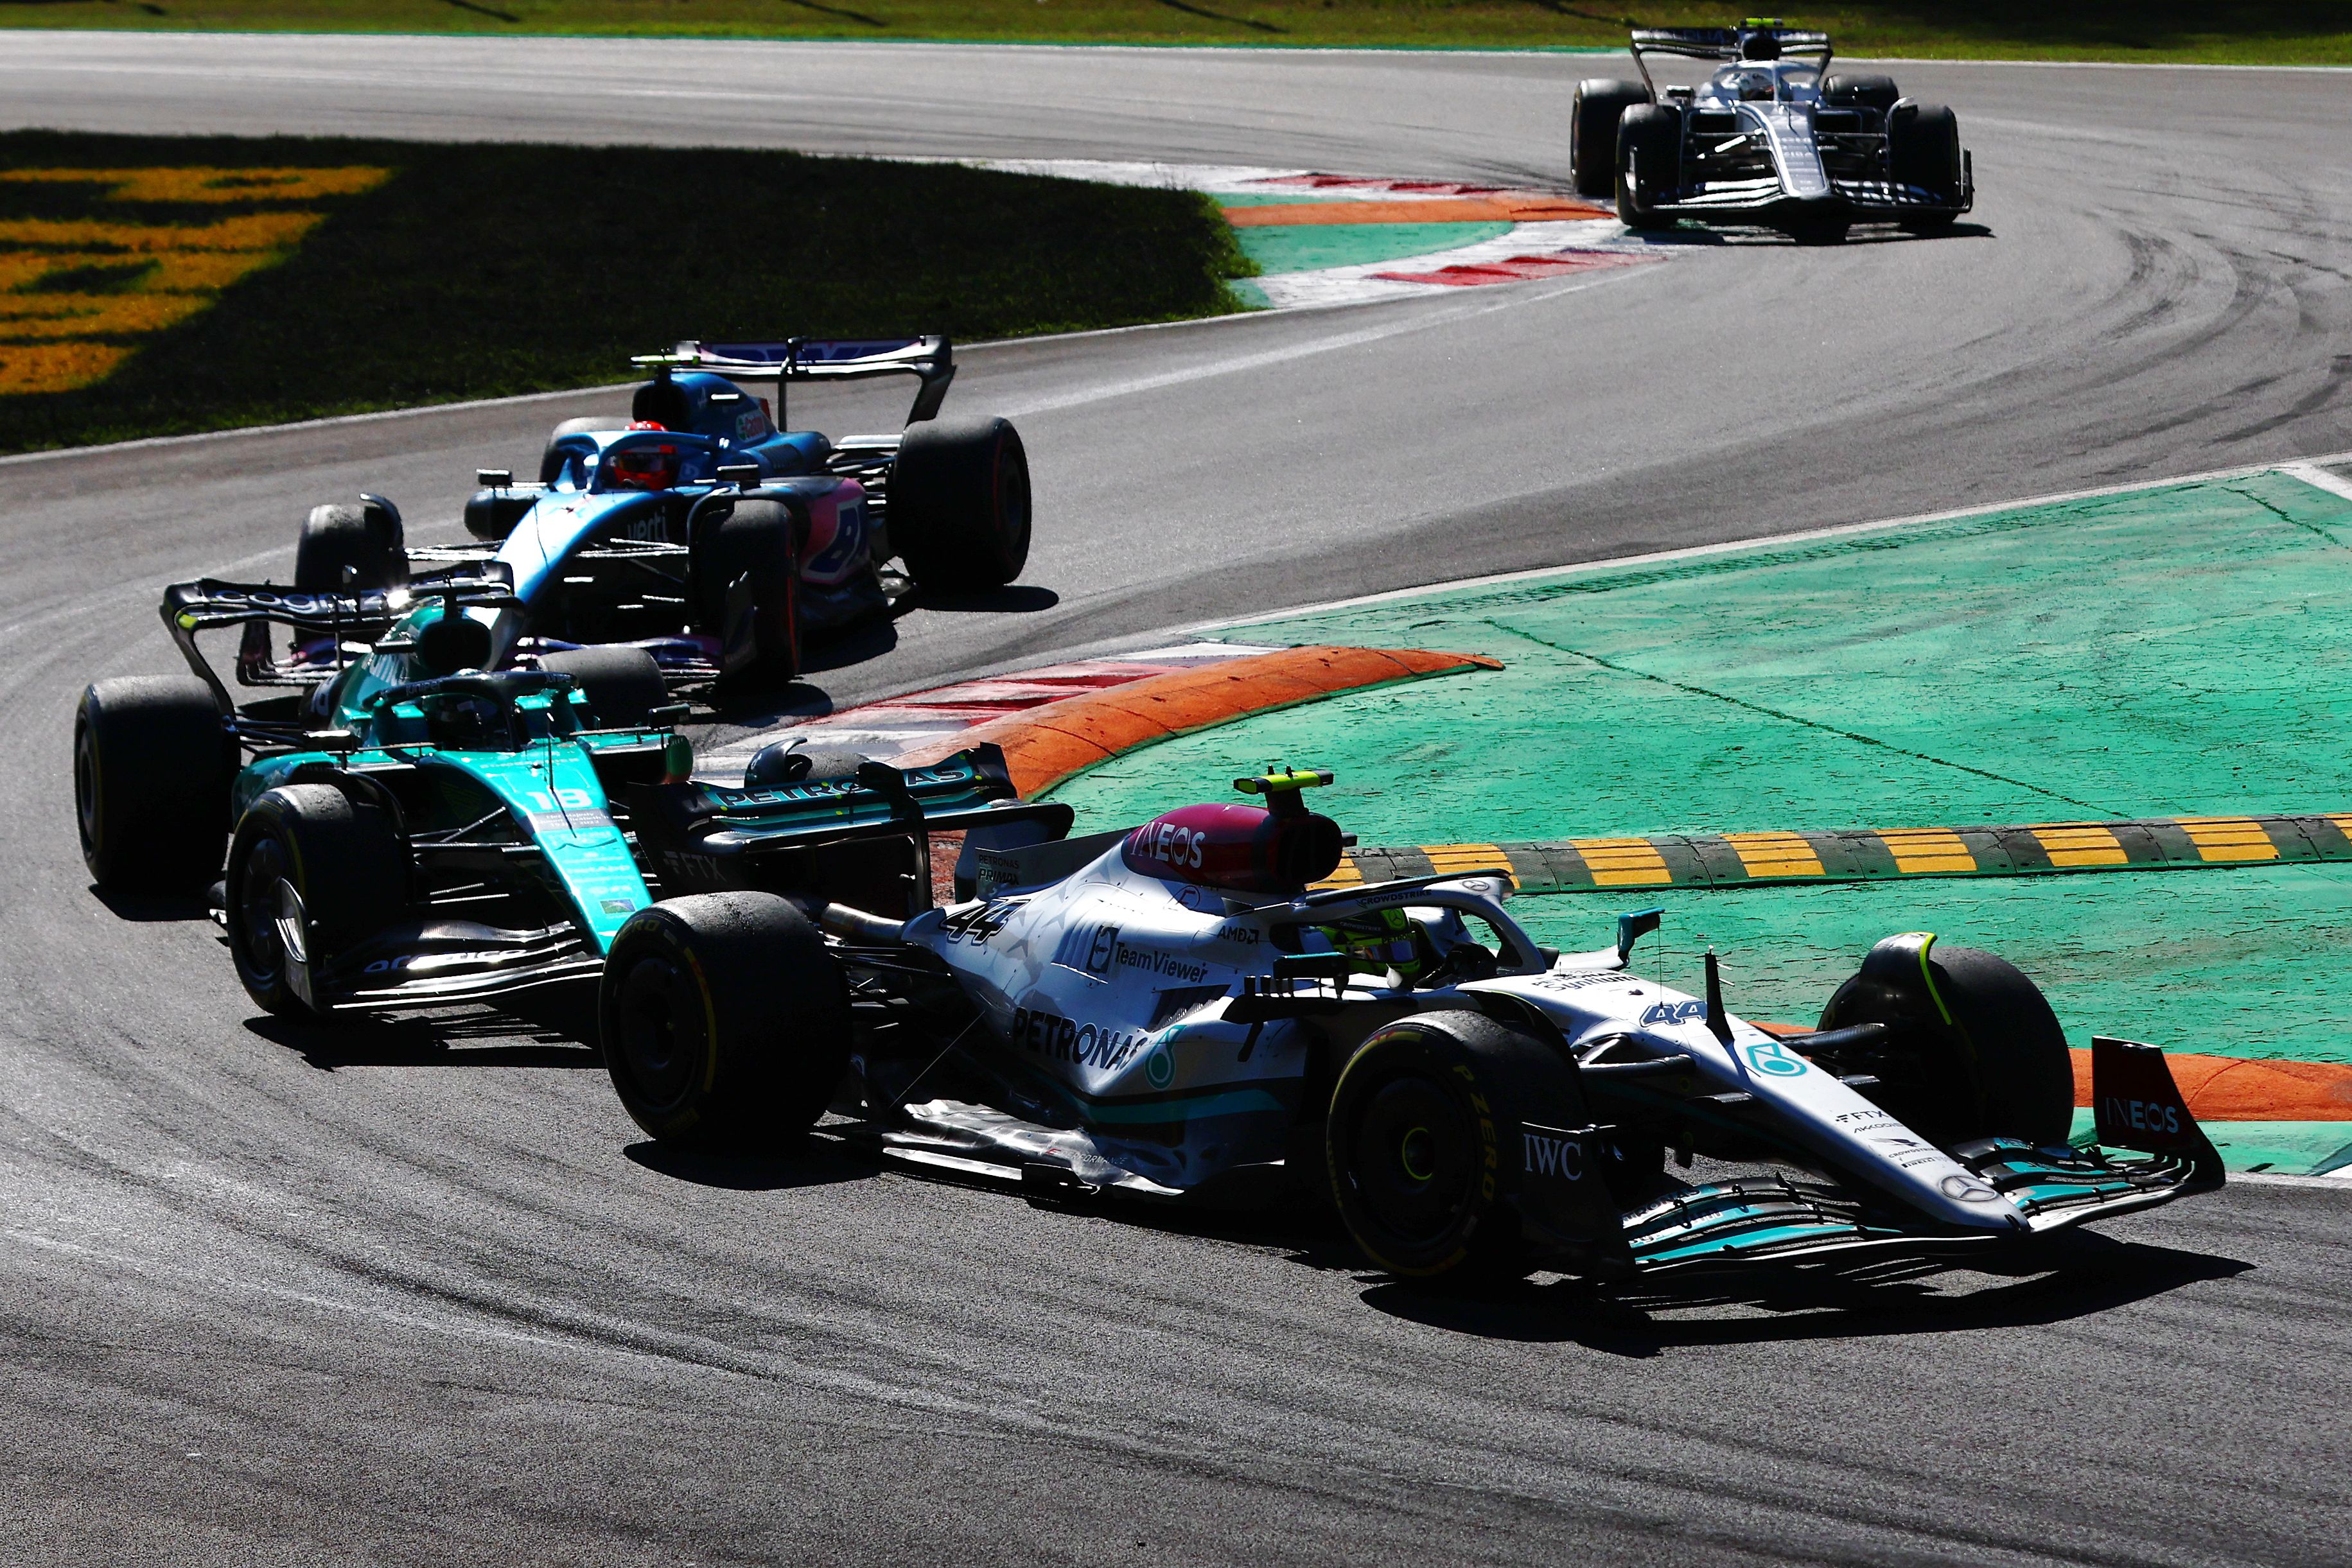 Lewis Hamilton at the first chicane at Monza